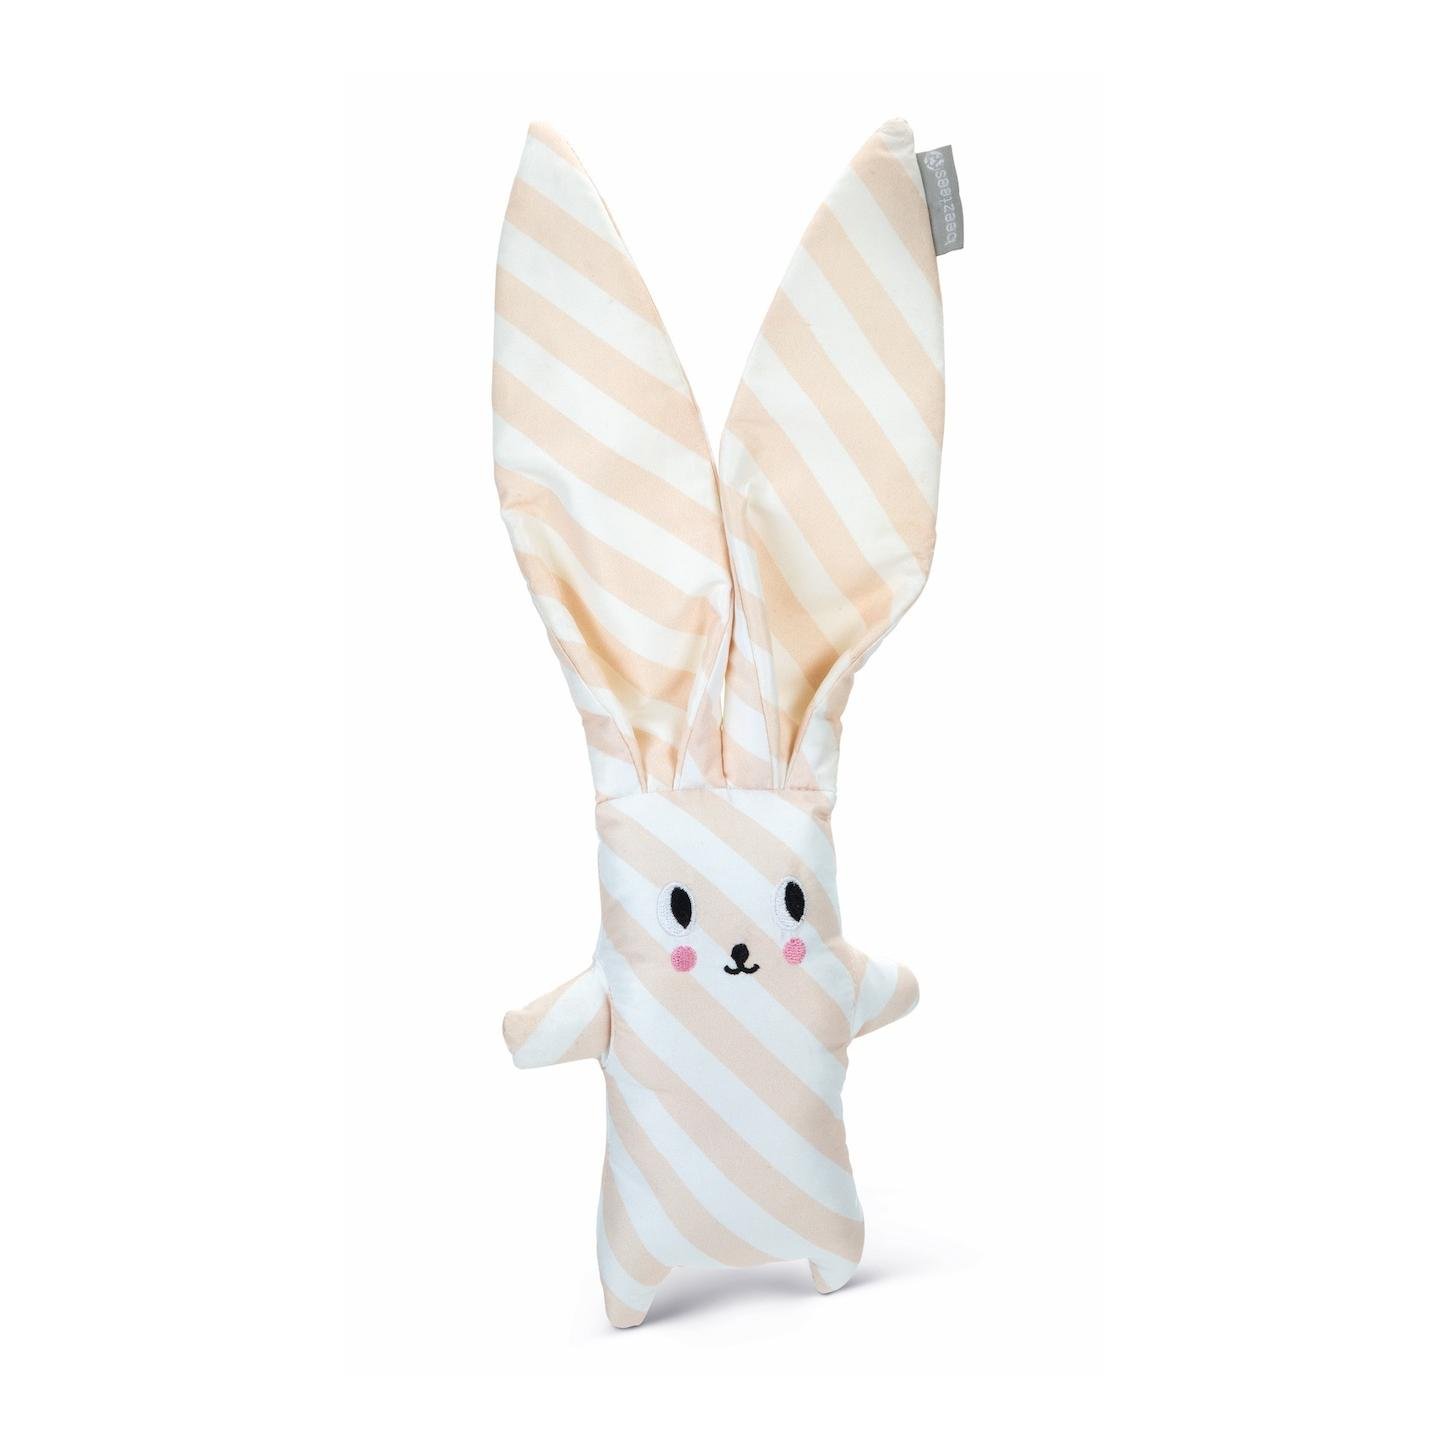 Image of Beeztees Spielzeug Hase Buddy - pink/weiss bei Hauptner.ch